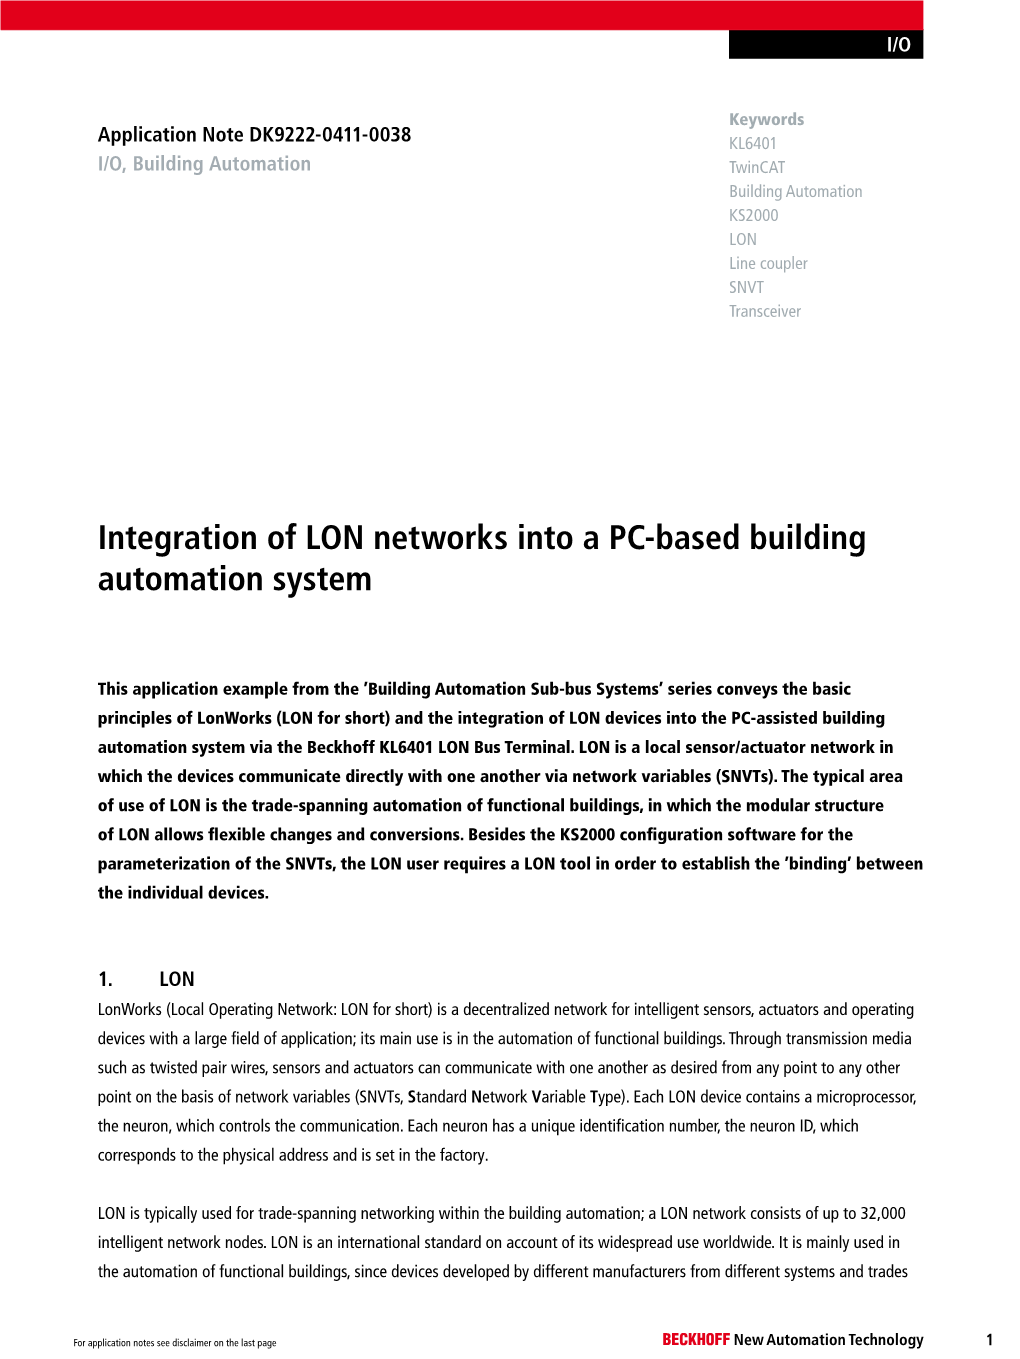 Integration of LON Networks Into a PC-Based Building Automation System